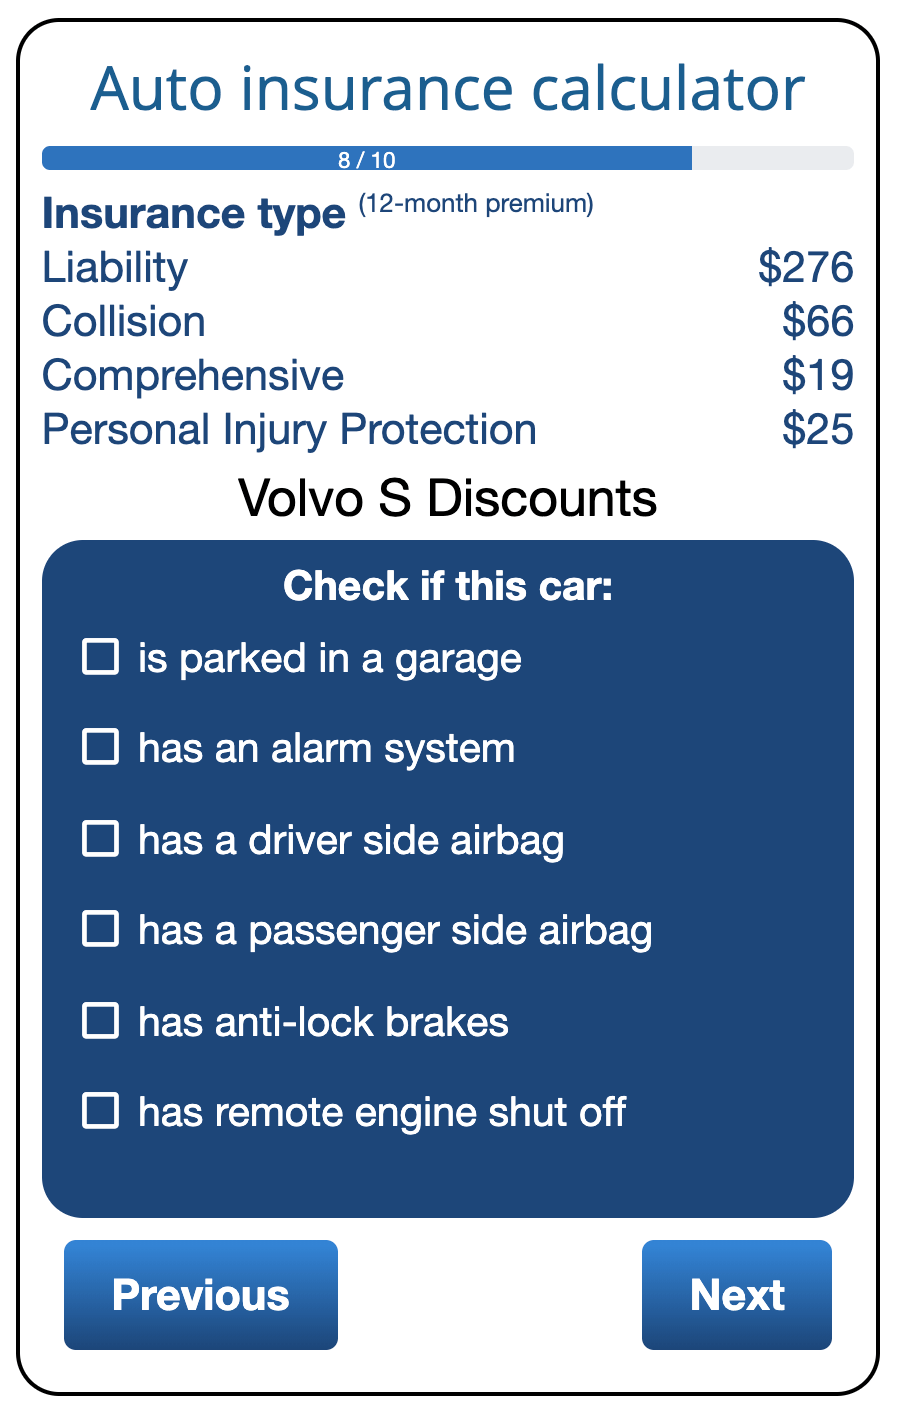 How to find which vehicle safety features qualify for discount auto insurance